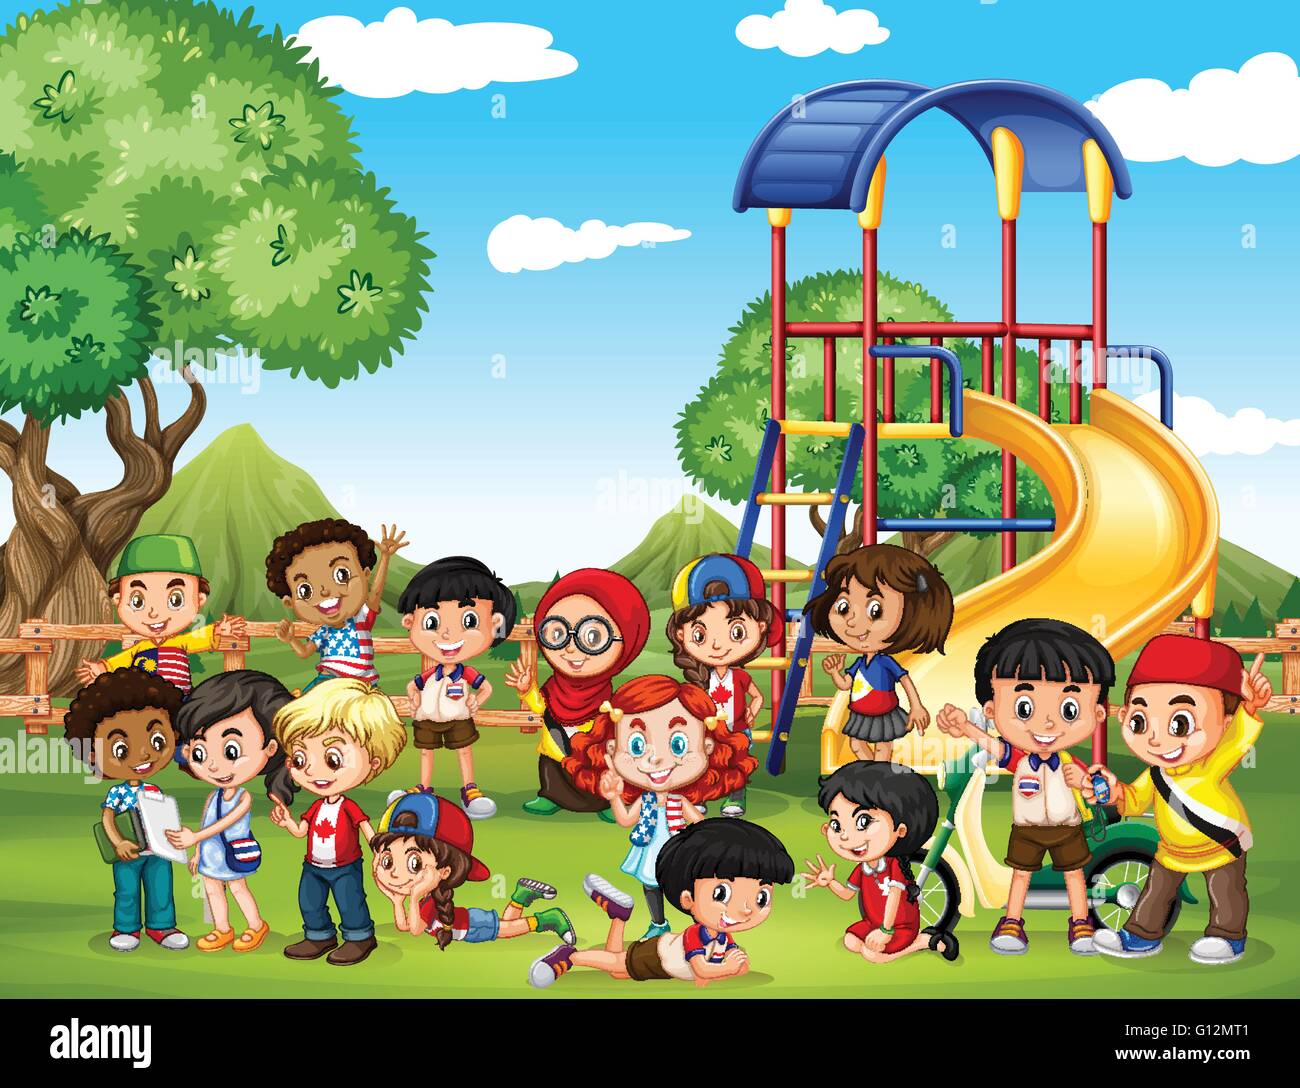 Children playing in the park illustration Stock Vector